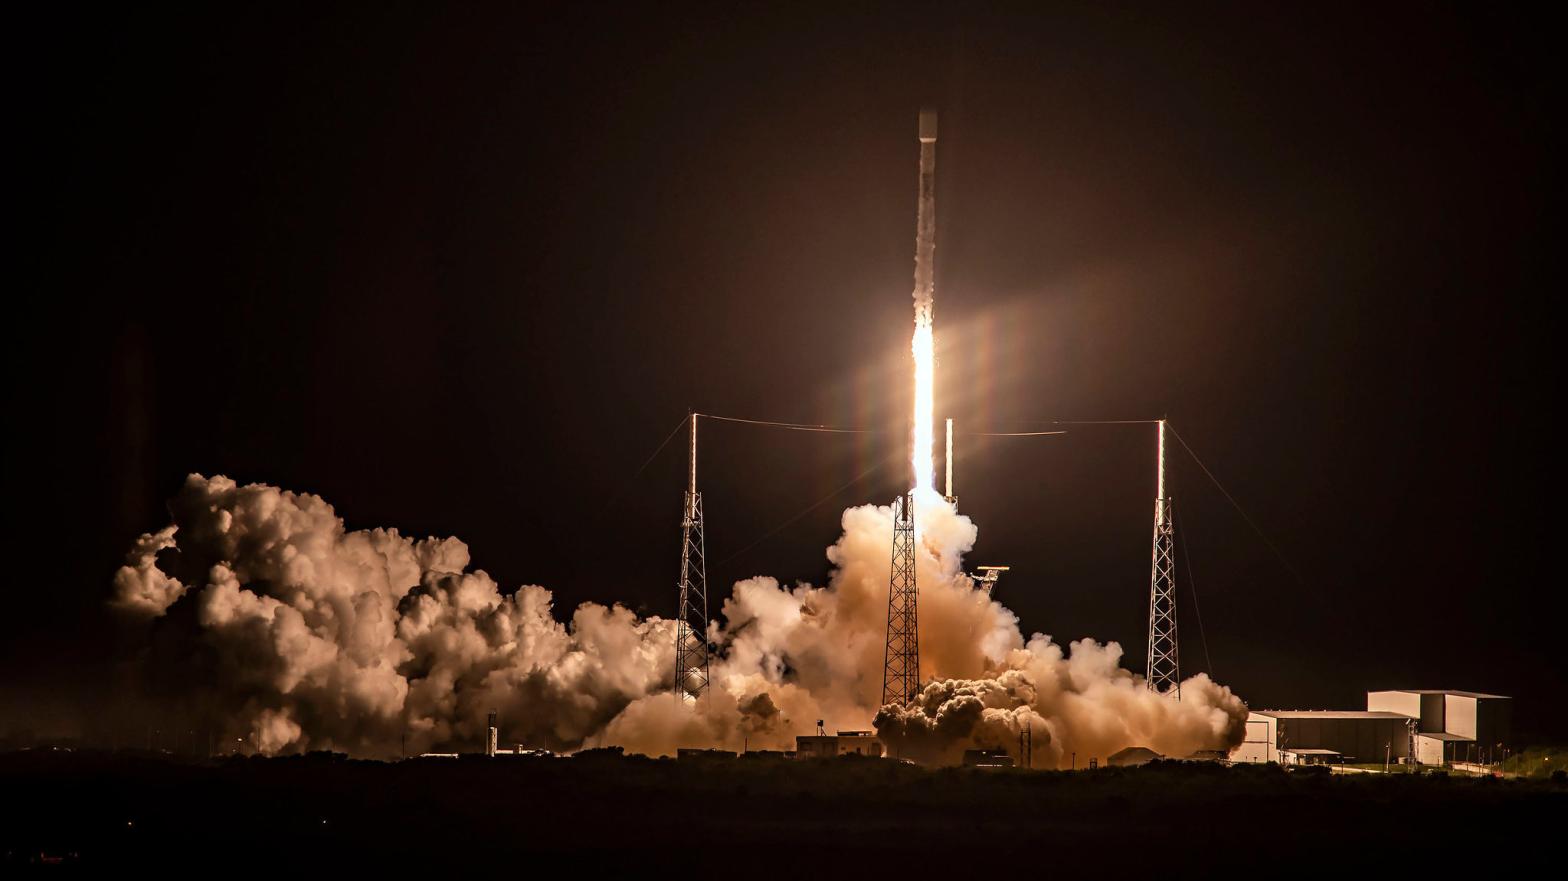 A SpaceX rocket carrying Starlink satellites a few seconds after launch on June 3, 2020. (Photo: SpaceX)